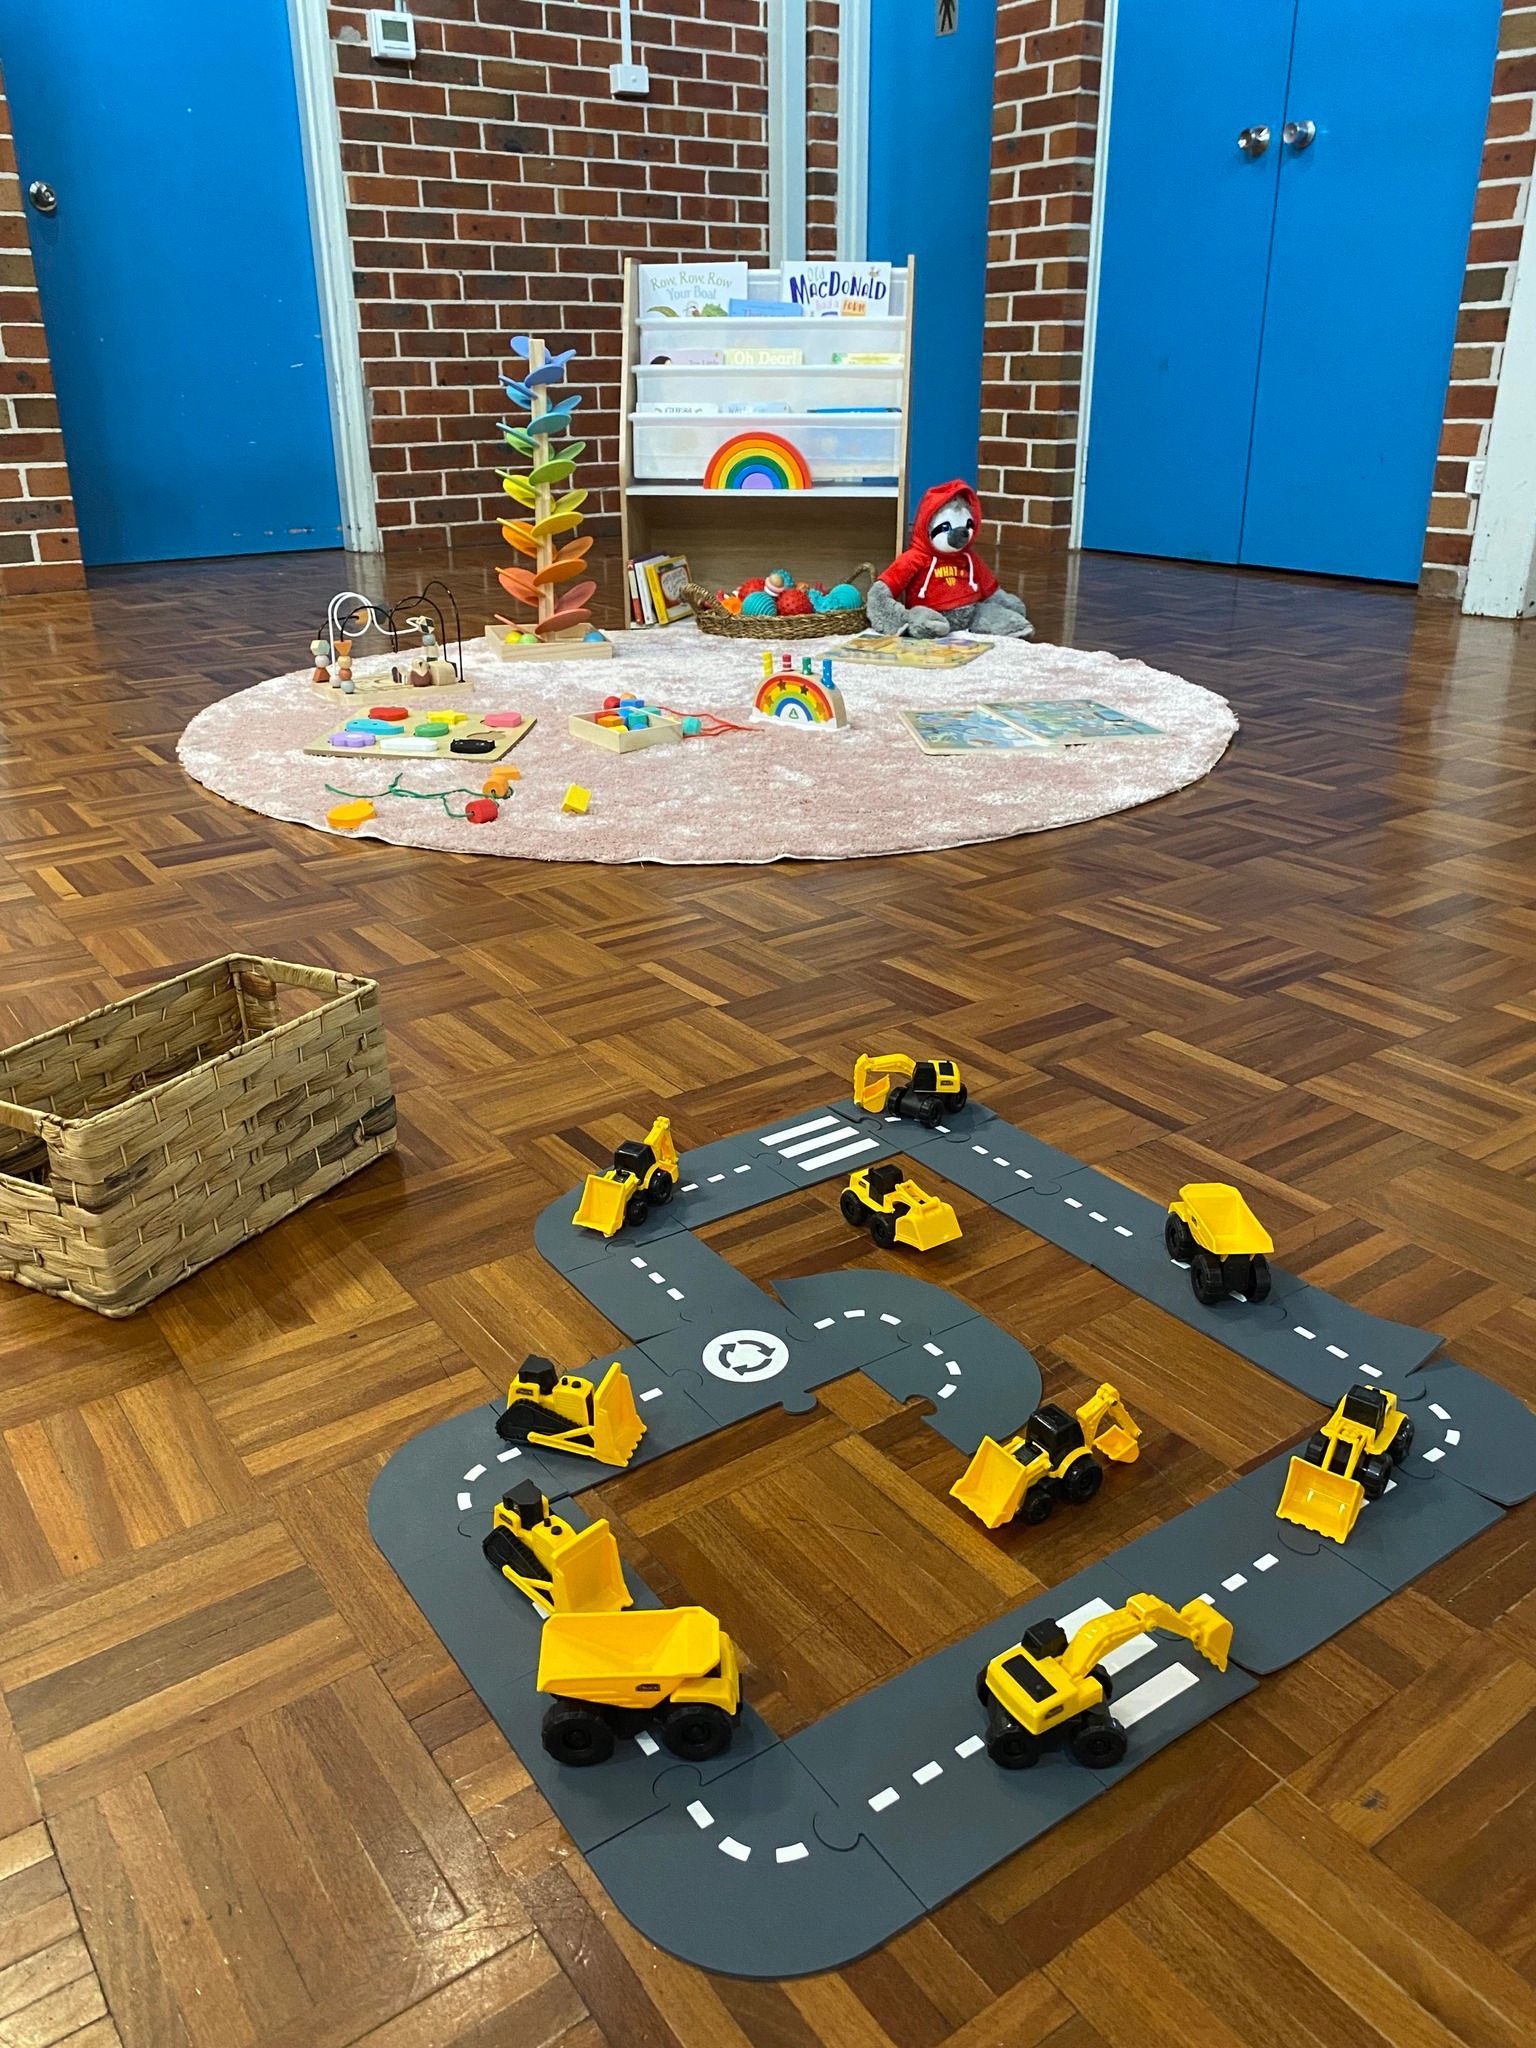 Children's Play Room With yellow toy trucks — The Happy Human Hub